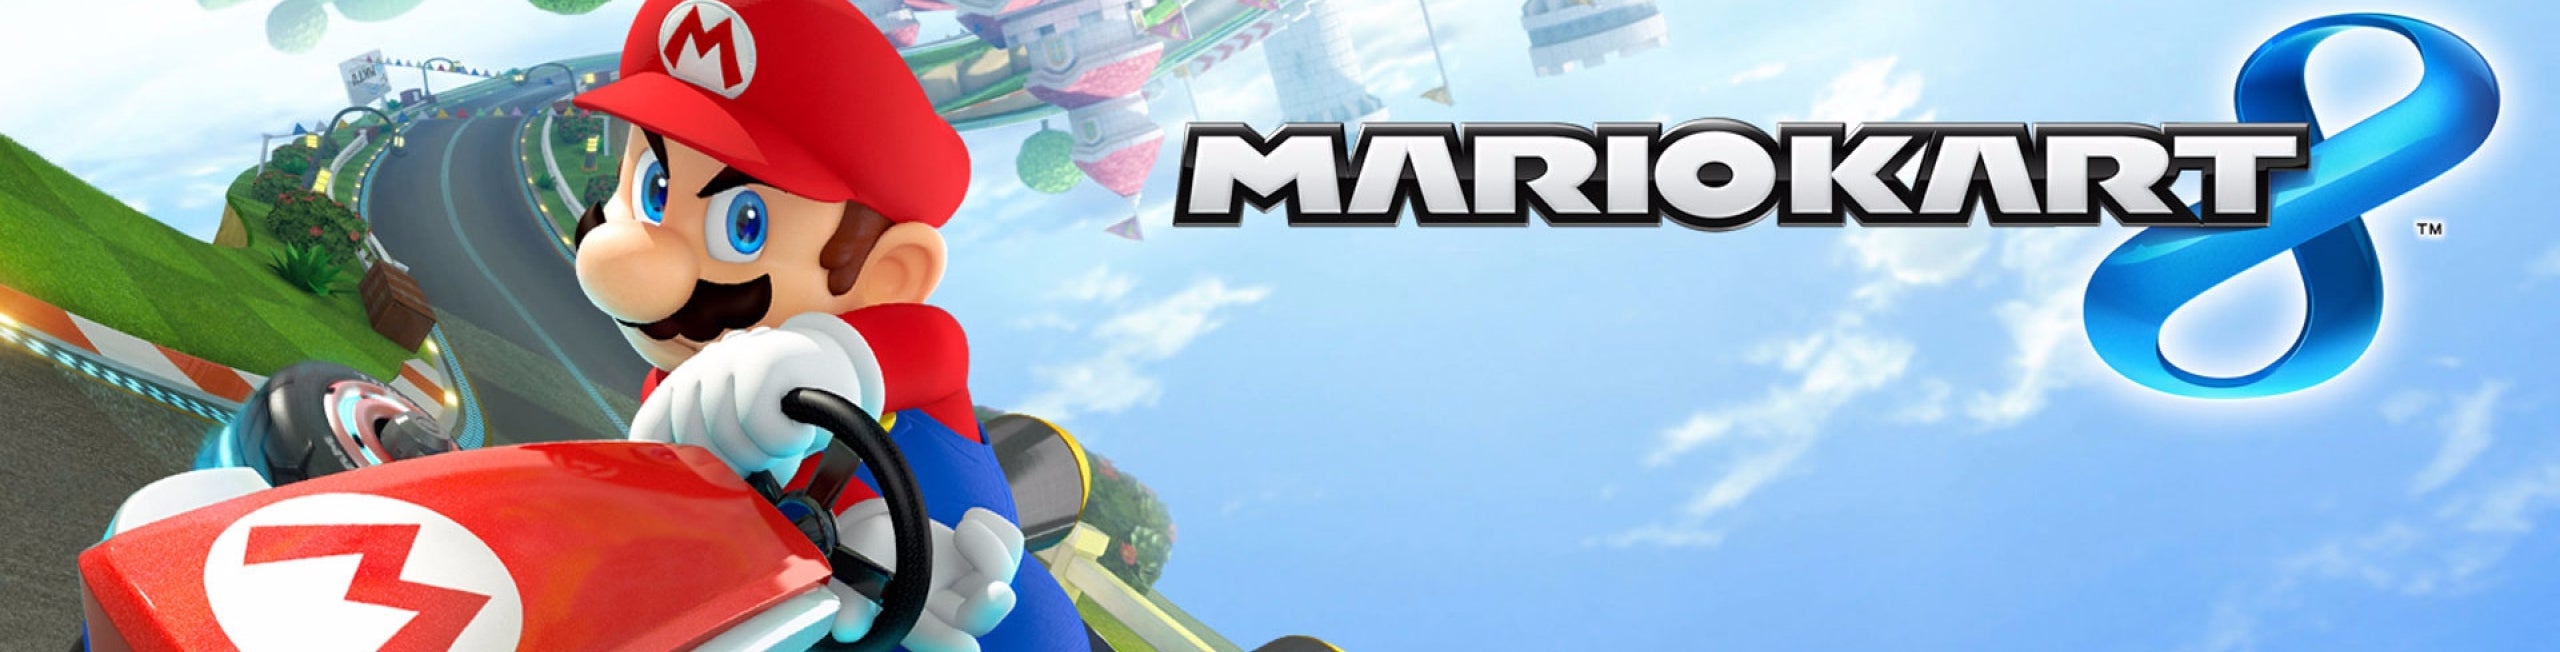 Image for Can sports data analysis figure out exactly how much Mario Kart screws you?